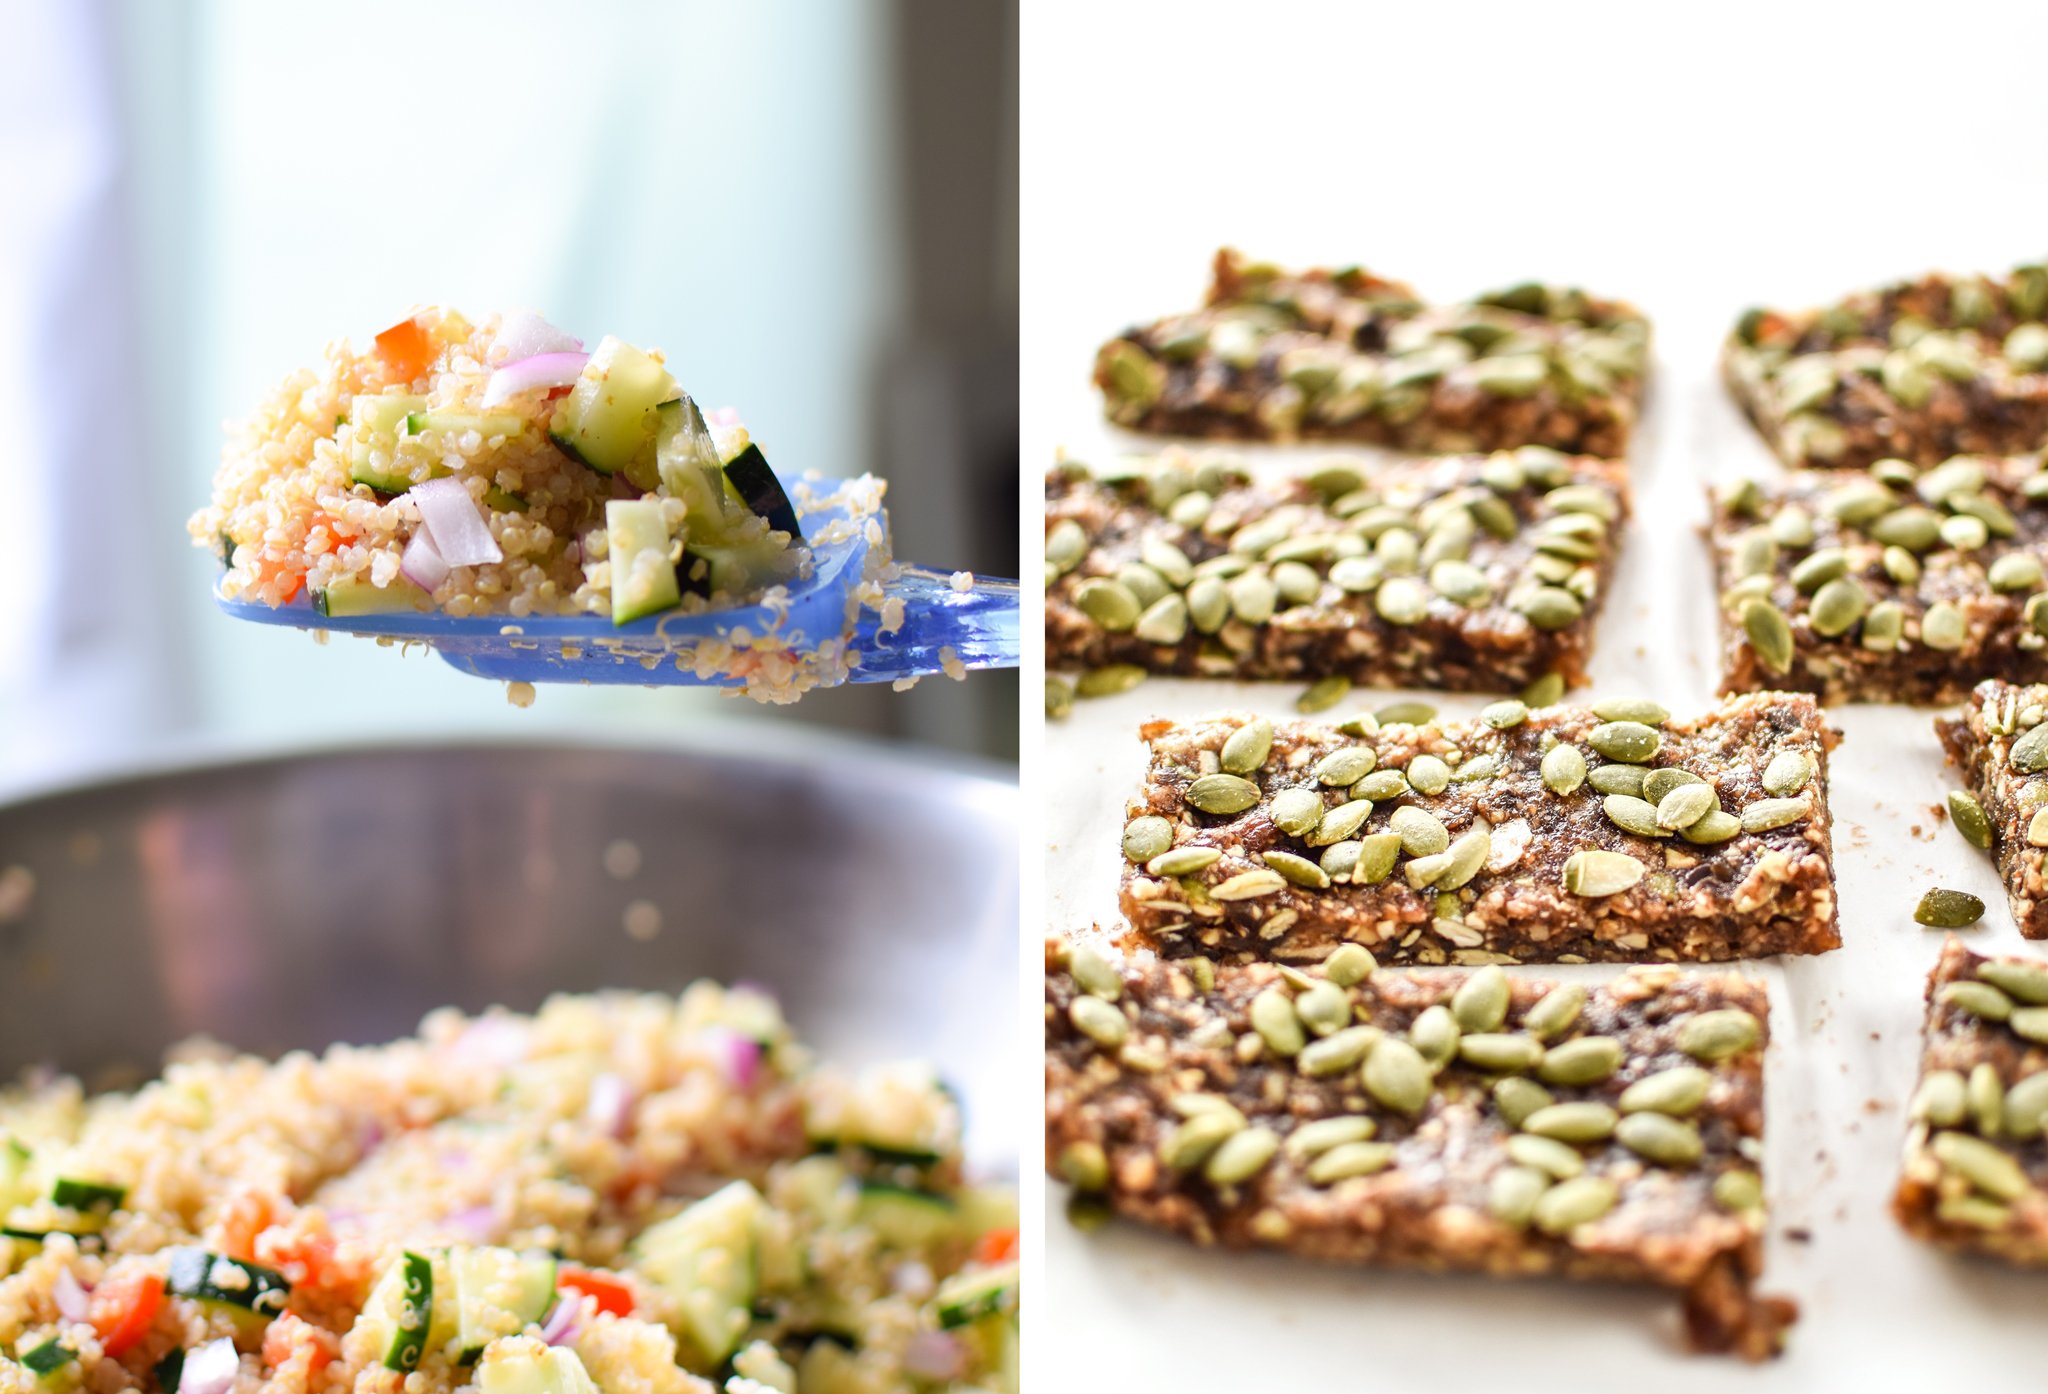 Quinoa salad with a hazy blue and grey background on the left; No-Bake Date bars on the right with a clean white background.